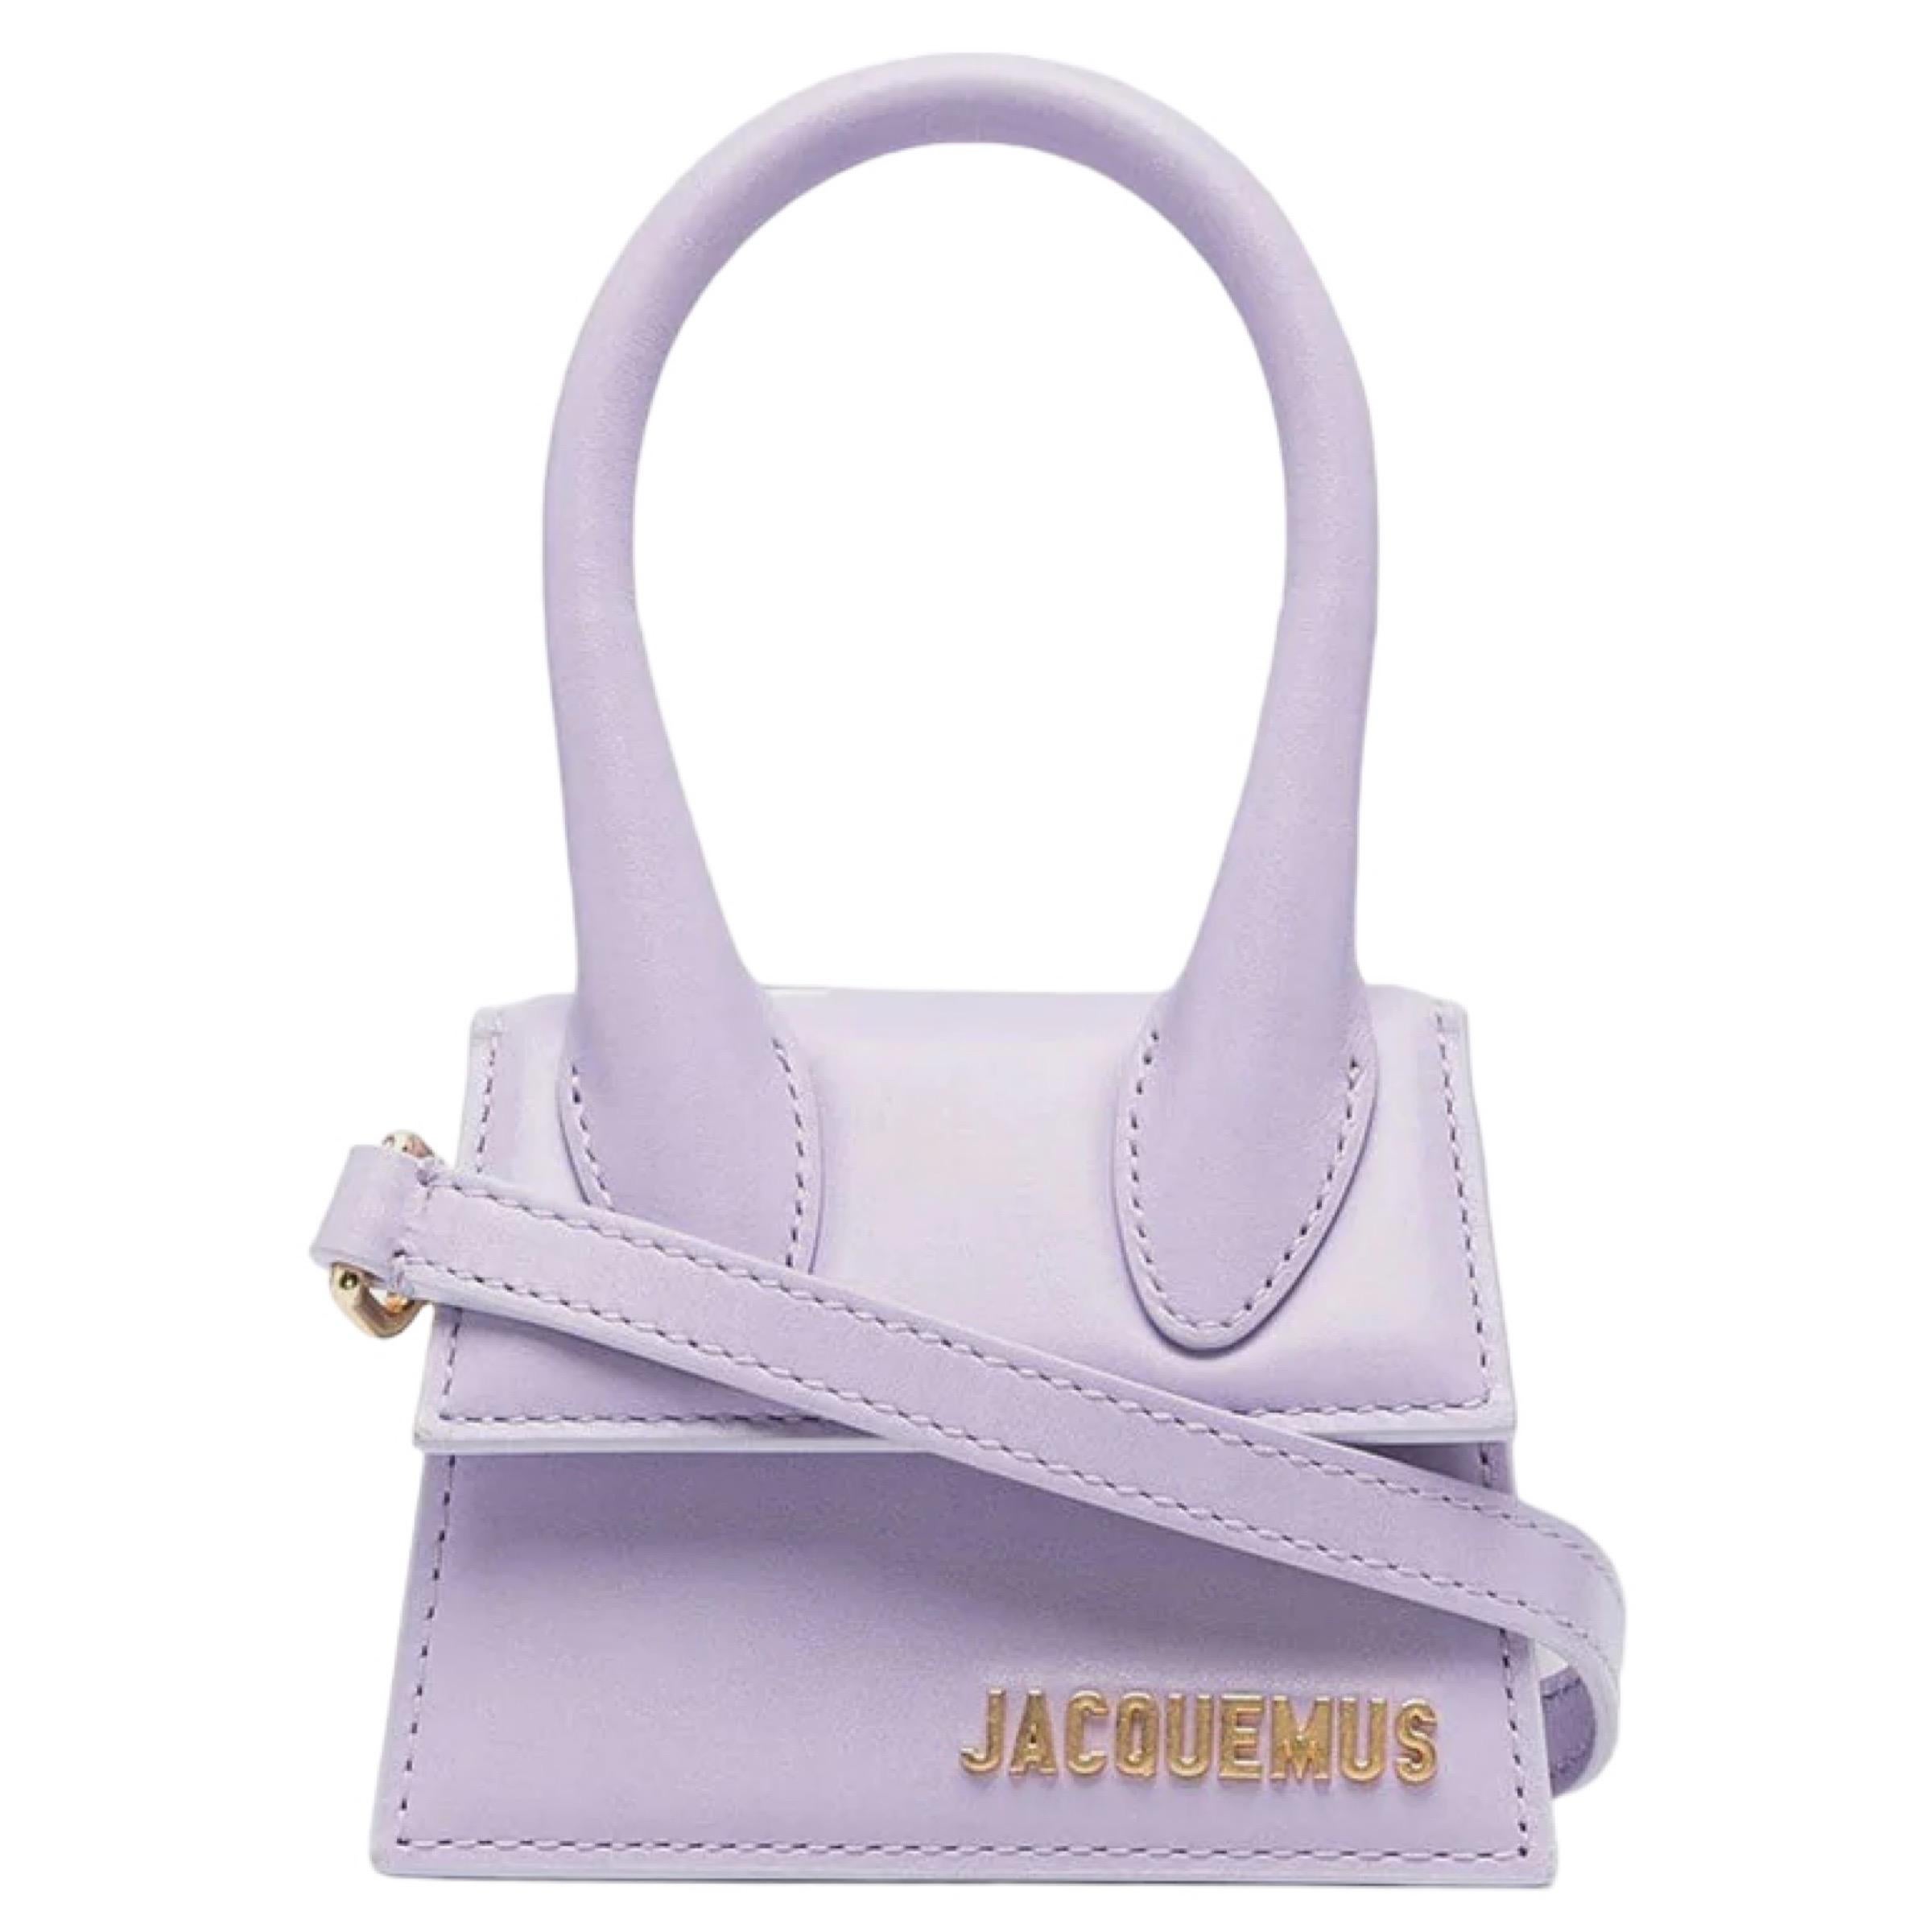 New Jacquemus Lilac Le Chiquito Signature Mini Leather Handbag Crossbody Bag

Authenticity Guaranteed

DETAILS
Brand: Jacquemus
Condition: Brand new
Gender: Women
Category: Crossbody bag
Color: Lilac
Material: Leather
Gold-tone hardware
Front gold